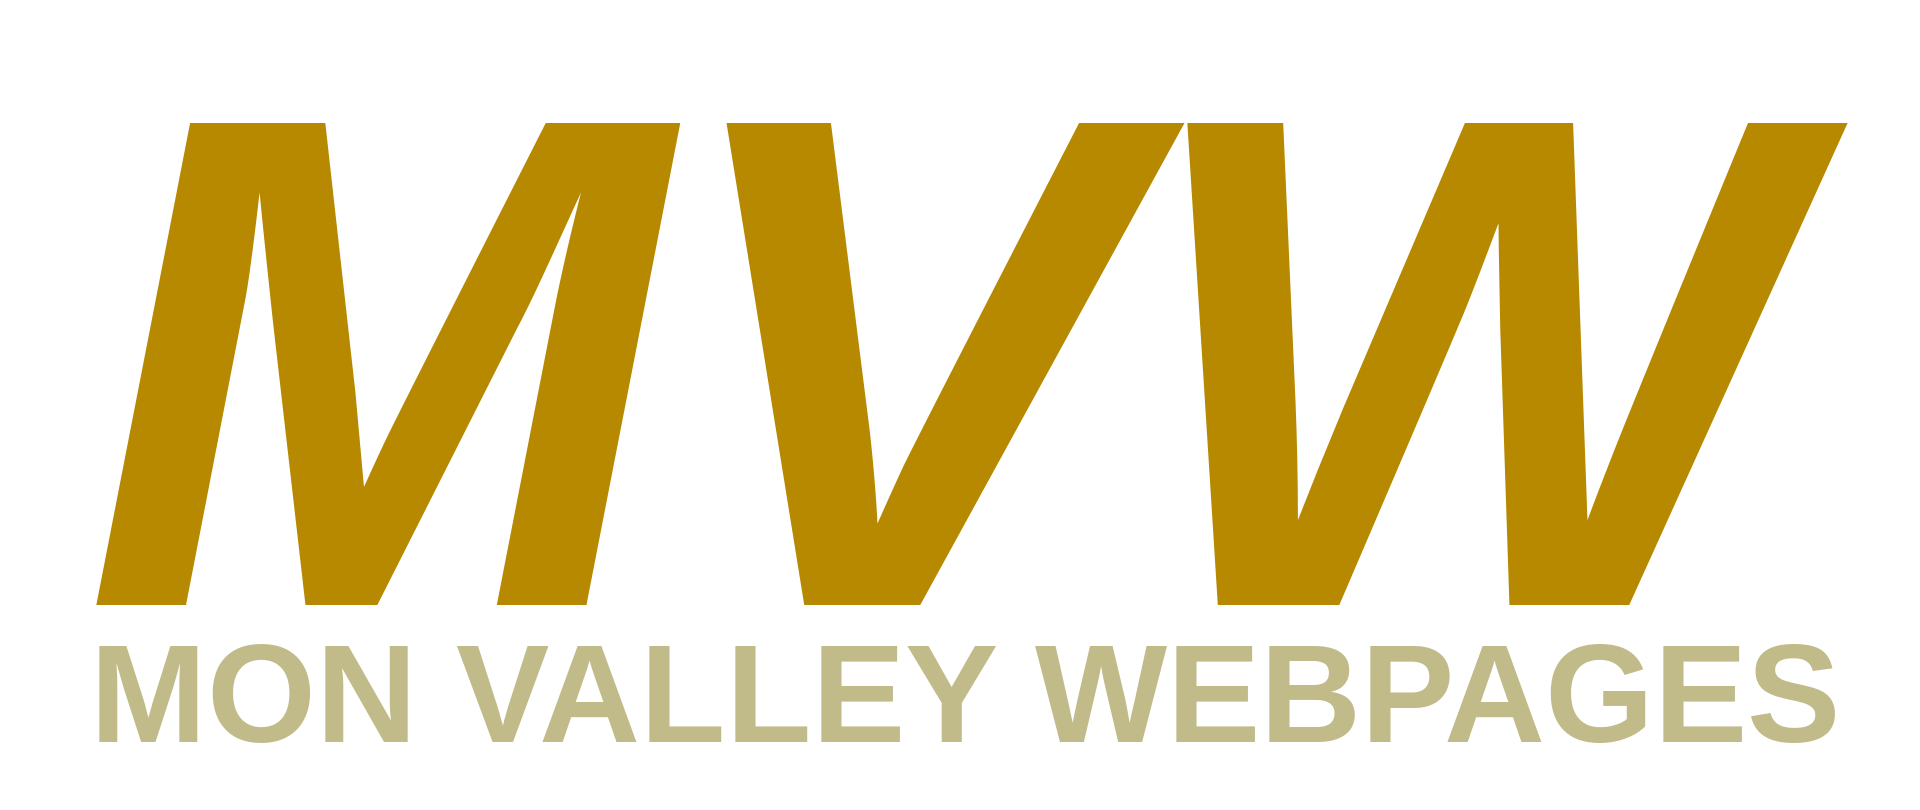 Mon Valley Webpages